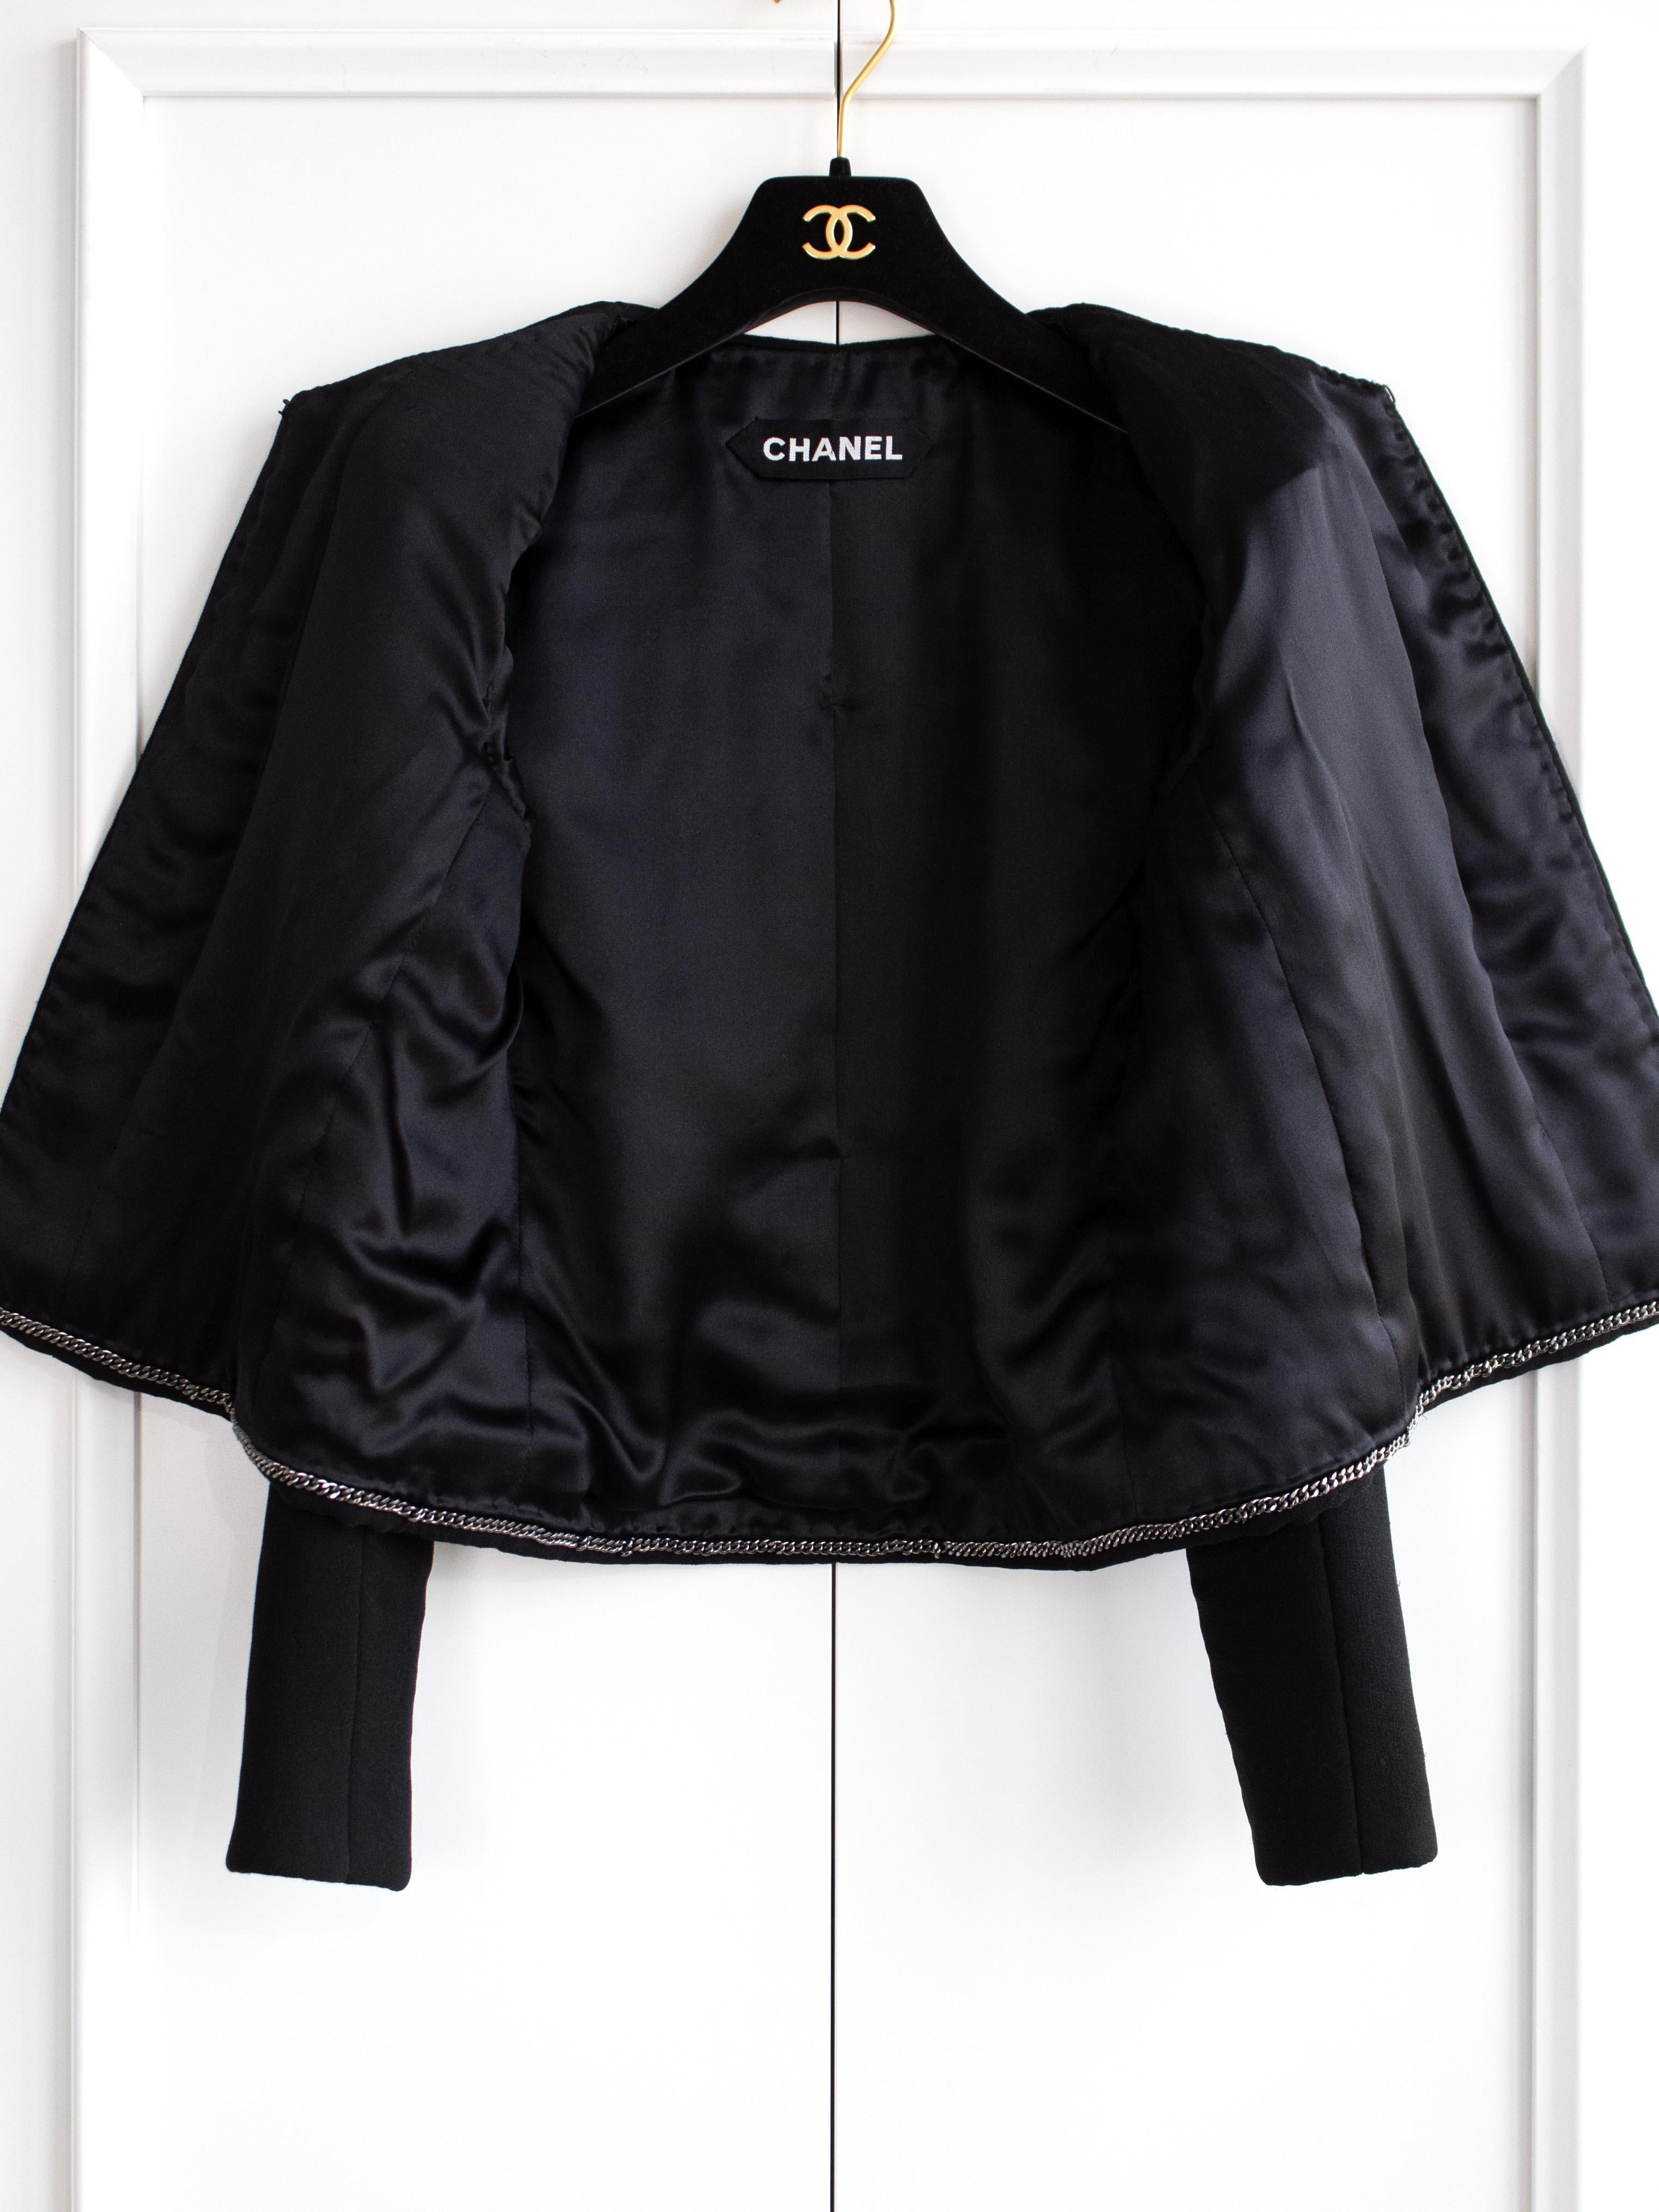 Chanel Haute Couture F/W 2004 LBJ Classic Black Collarless Jacket 6